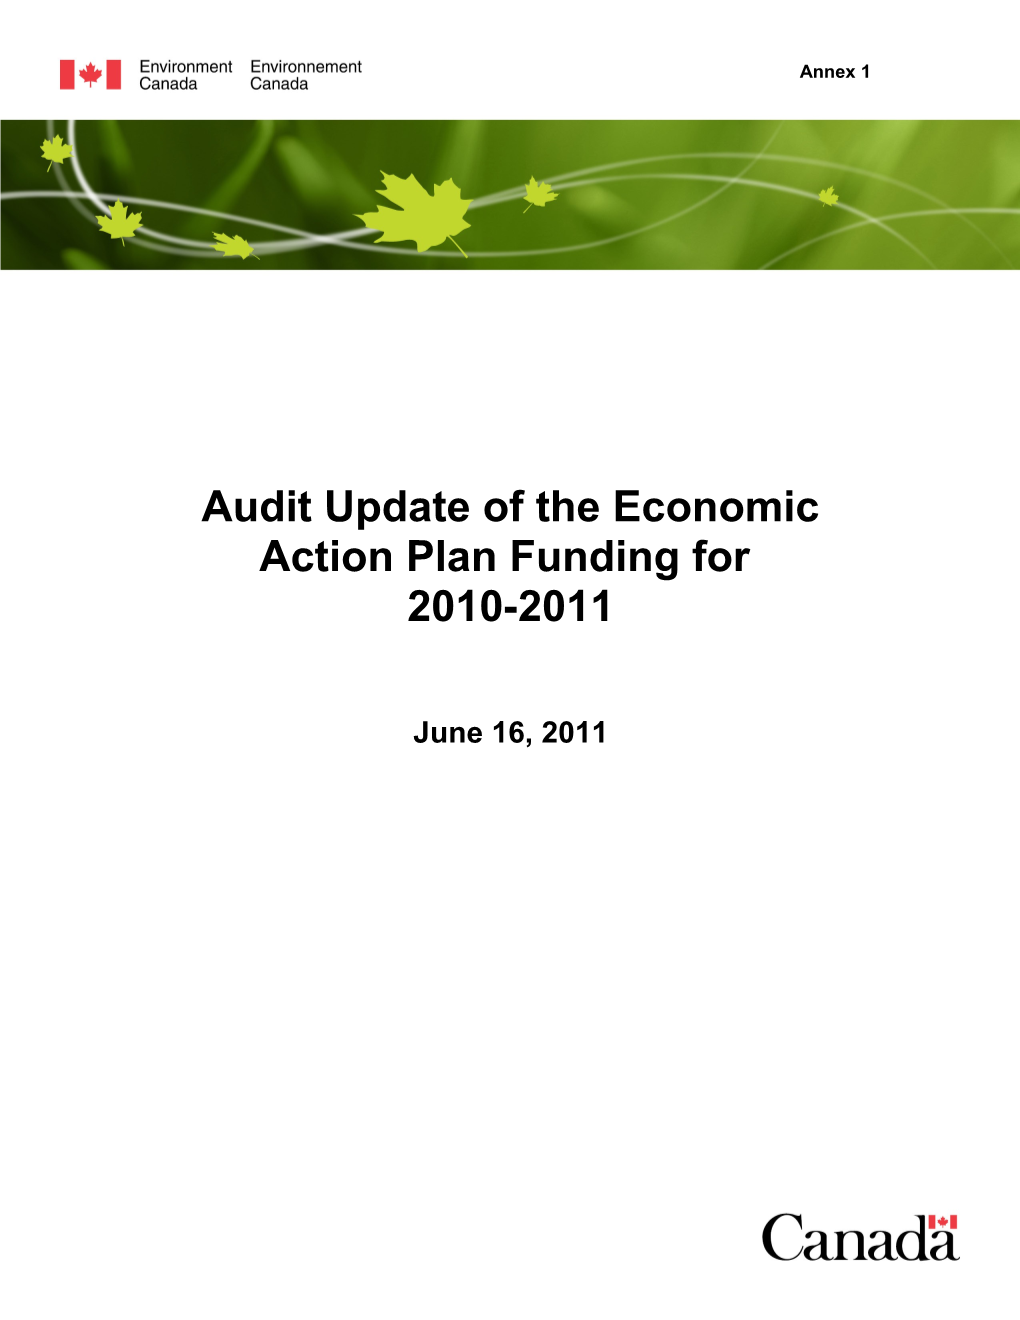 Audit of the Management of the Funding Received Through Canada S Economic Action Plan For